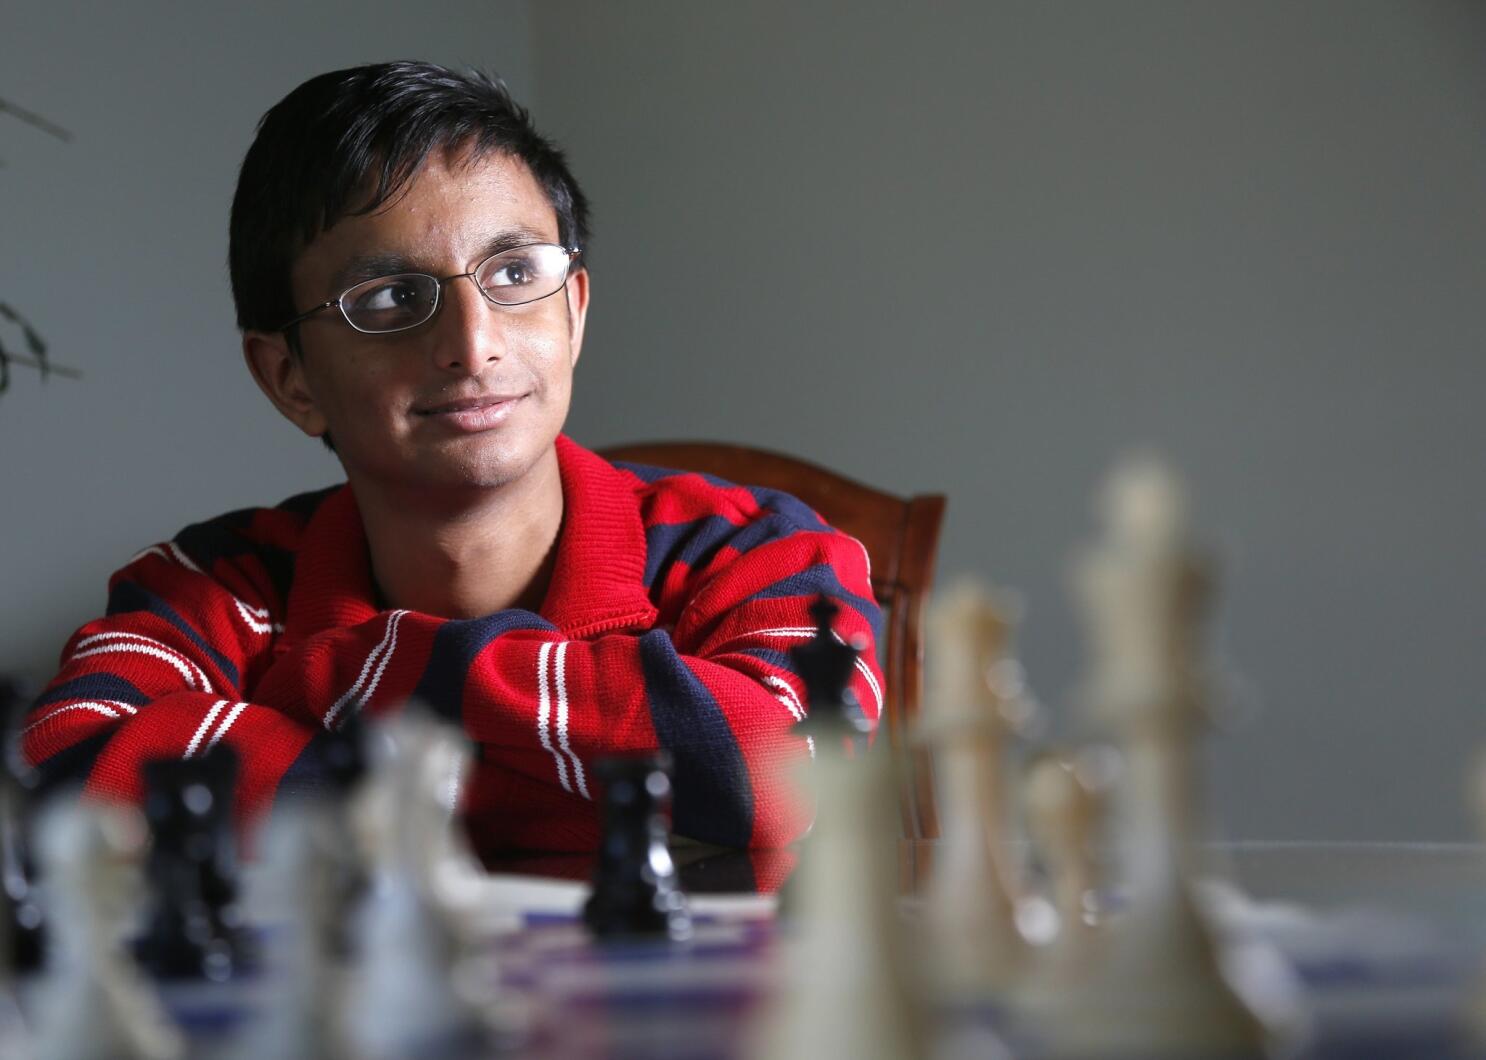 The top chess player in San Diego is Cyrus Lakdawala